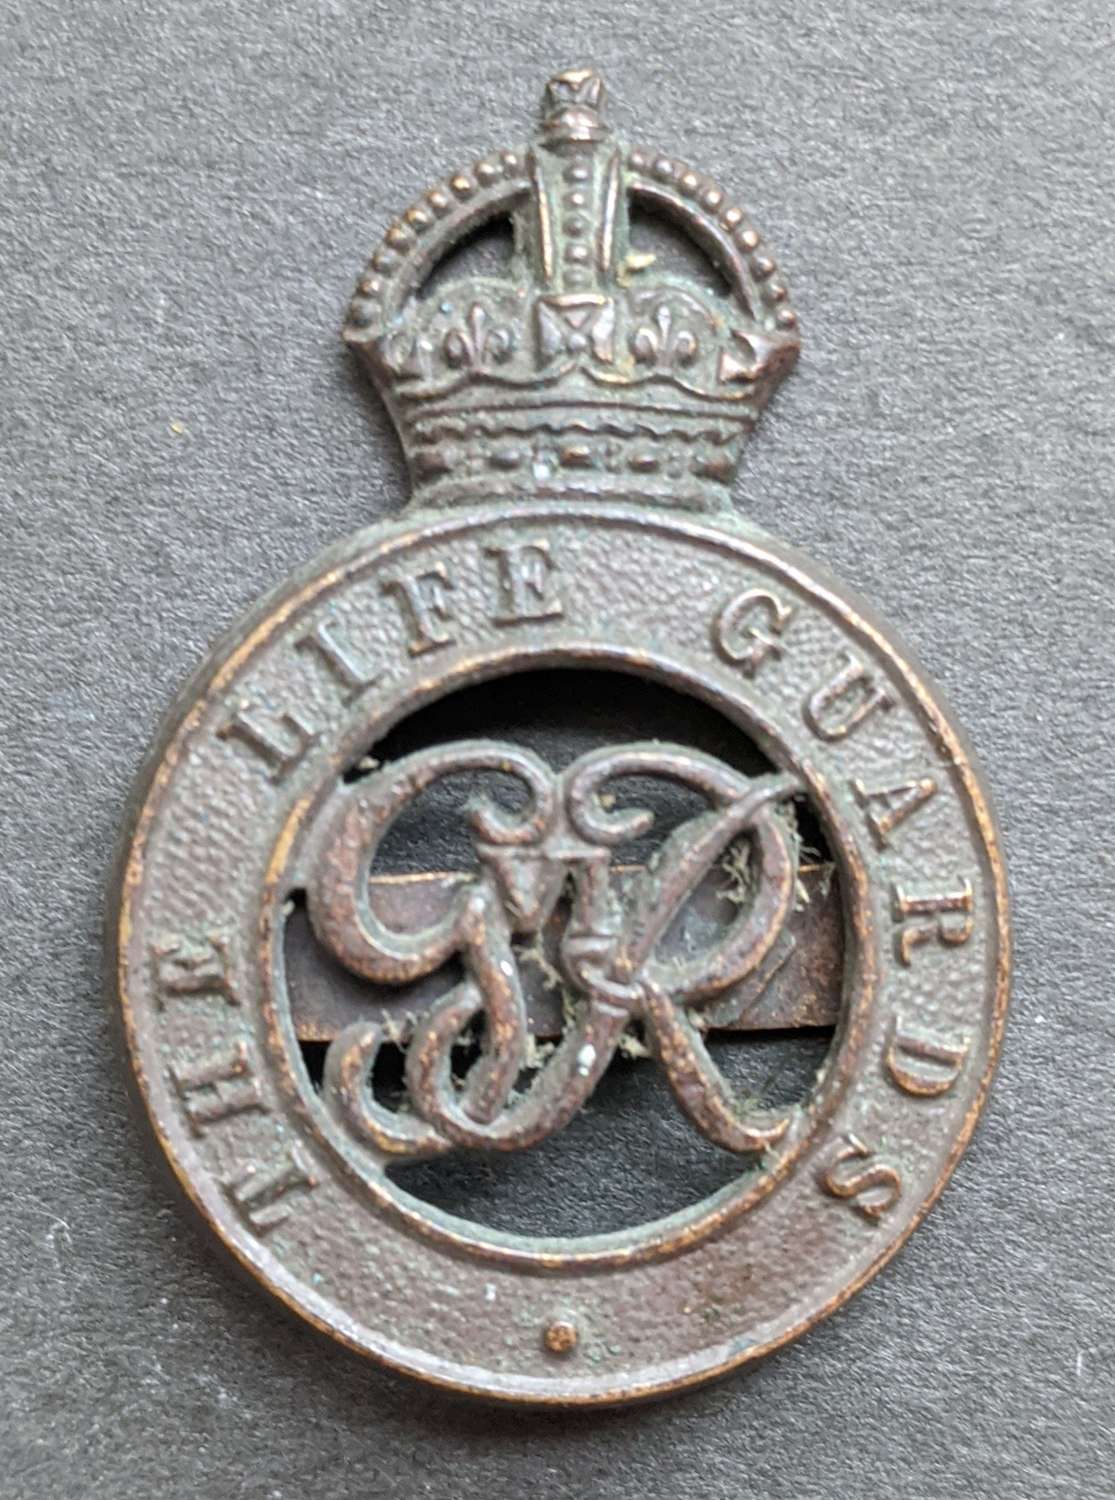 George VI Life Guards Officer’s OSD Cap Badge